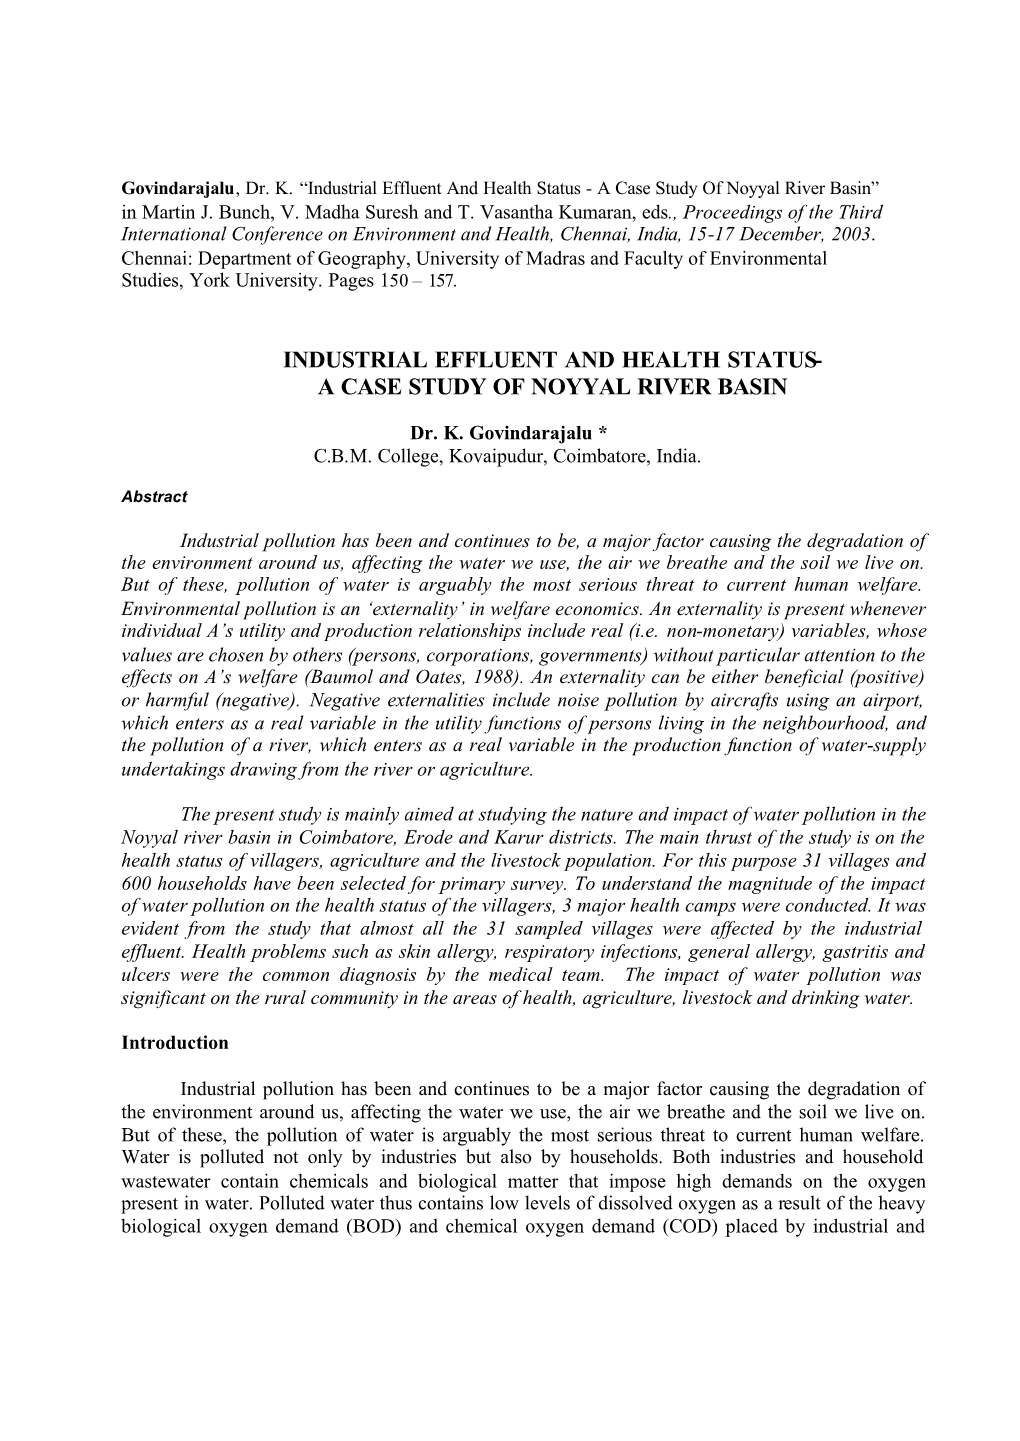 Industrial Effluent and Health Status - a Case Study of Noyyal River Basin” in Martin J